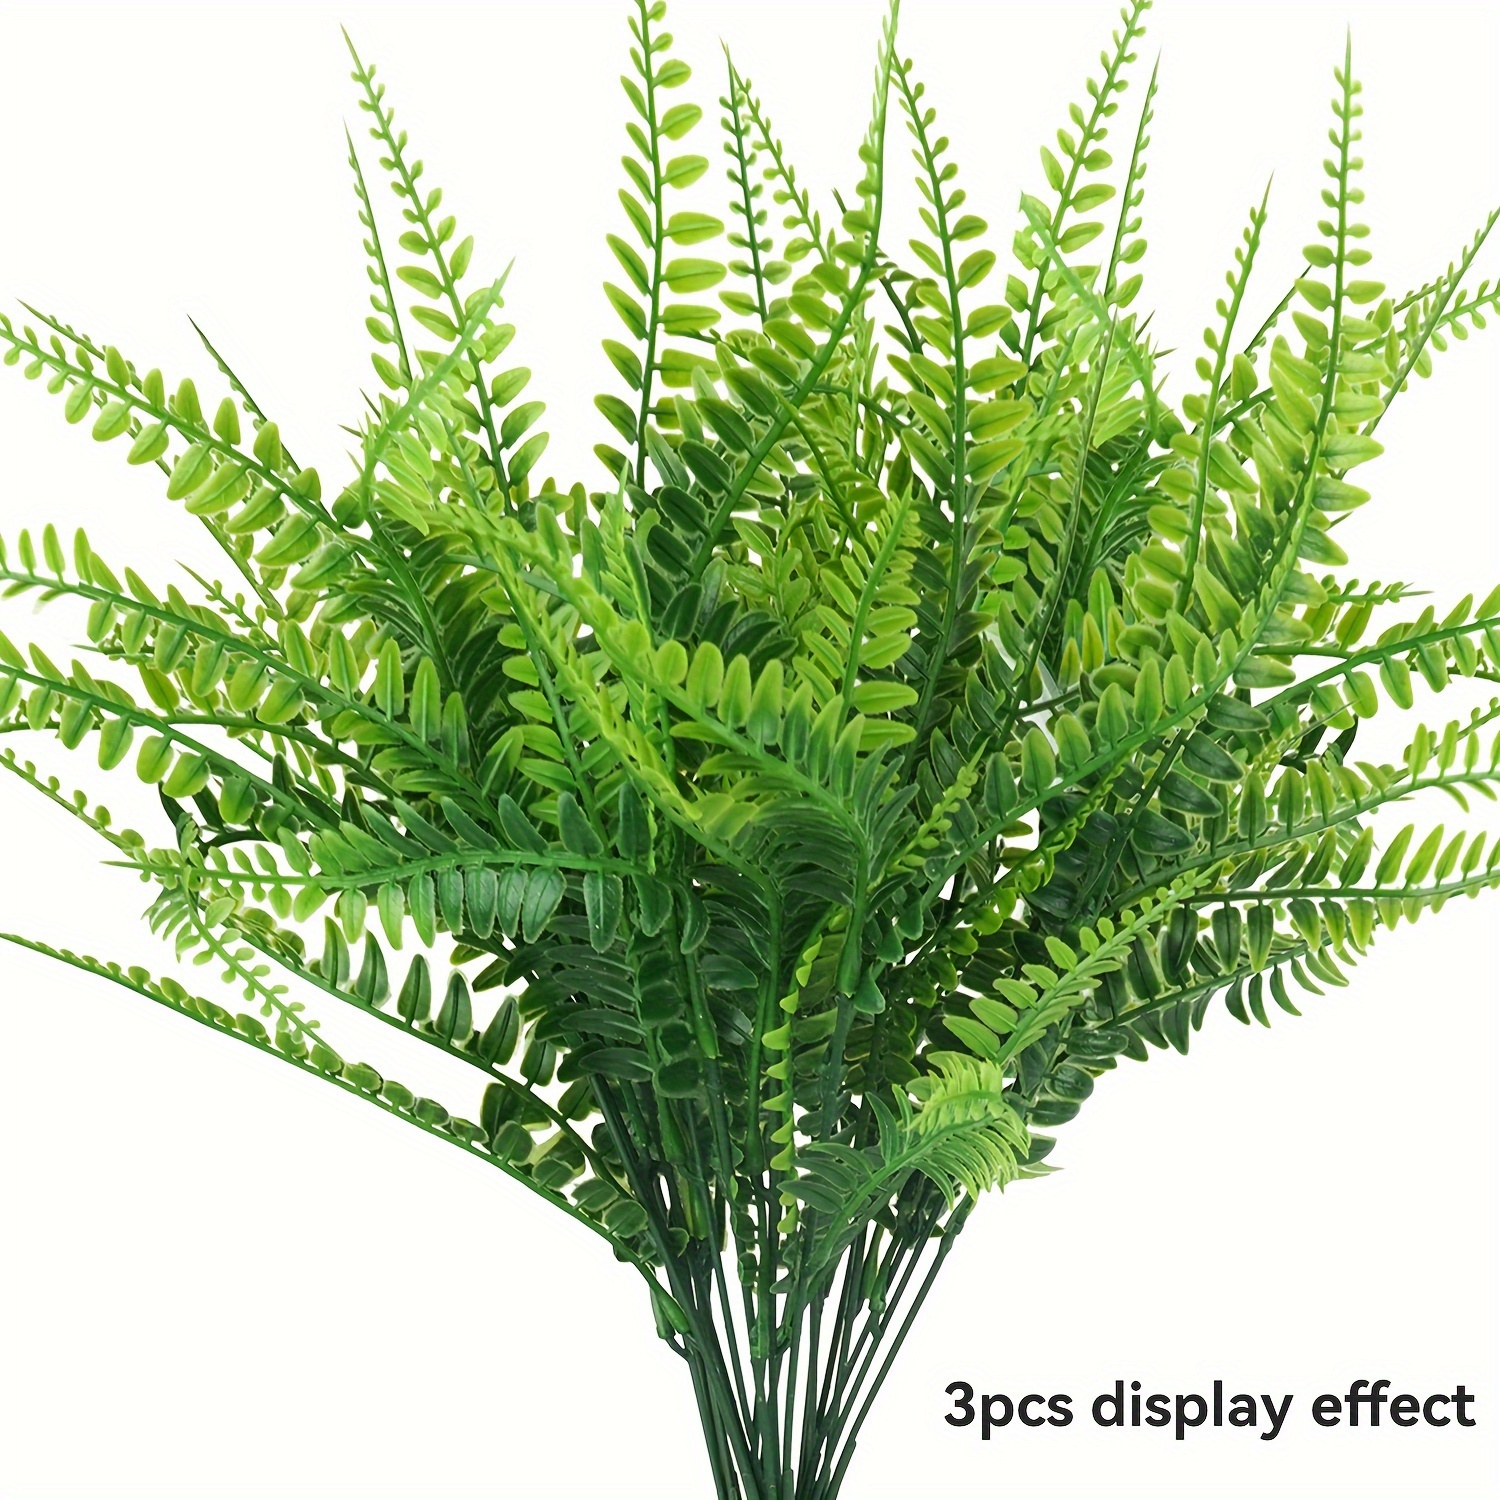 

18pcs Artificial Ferns For Outdoors Fake Boston Fern Large Greenery Plants Uv Resistant Faux Plastic Plants For Garden Front Porch Window Box Indoor Outdoor Decoration